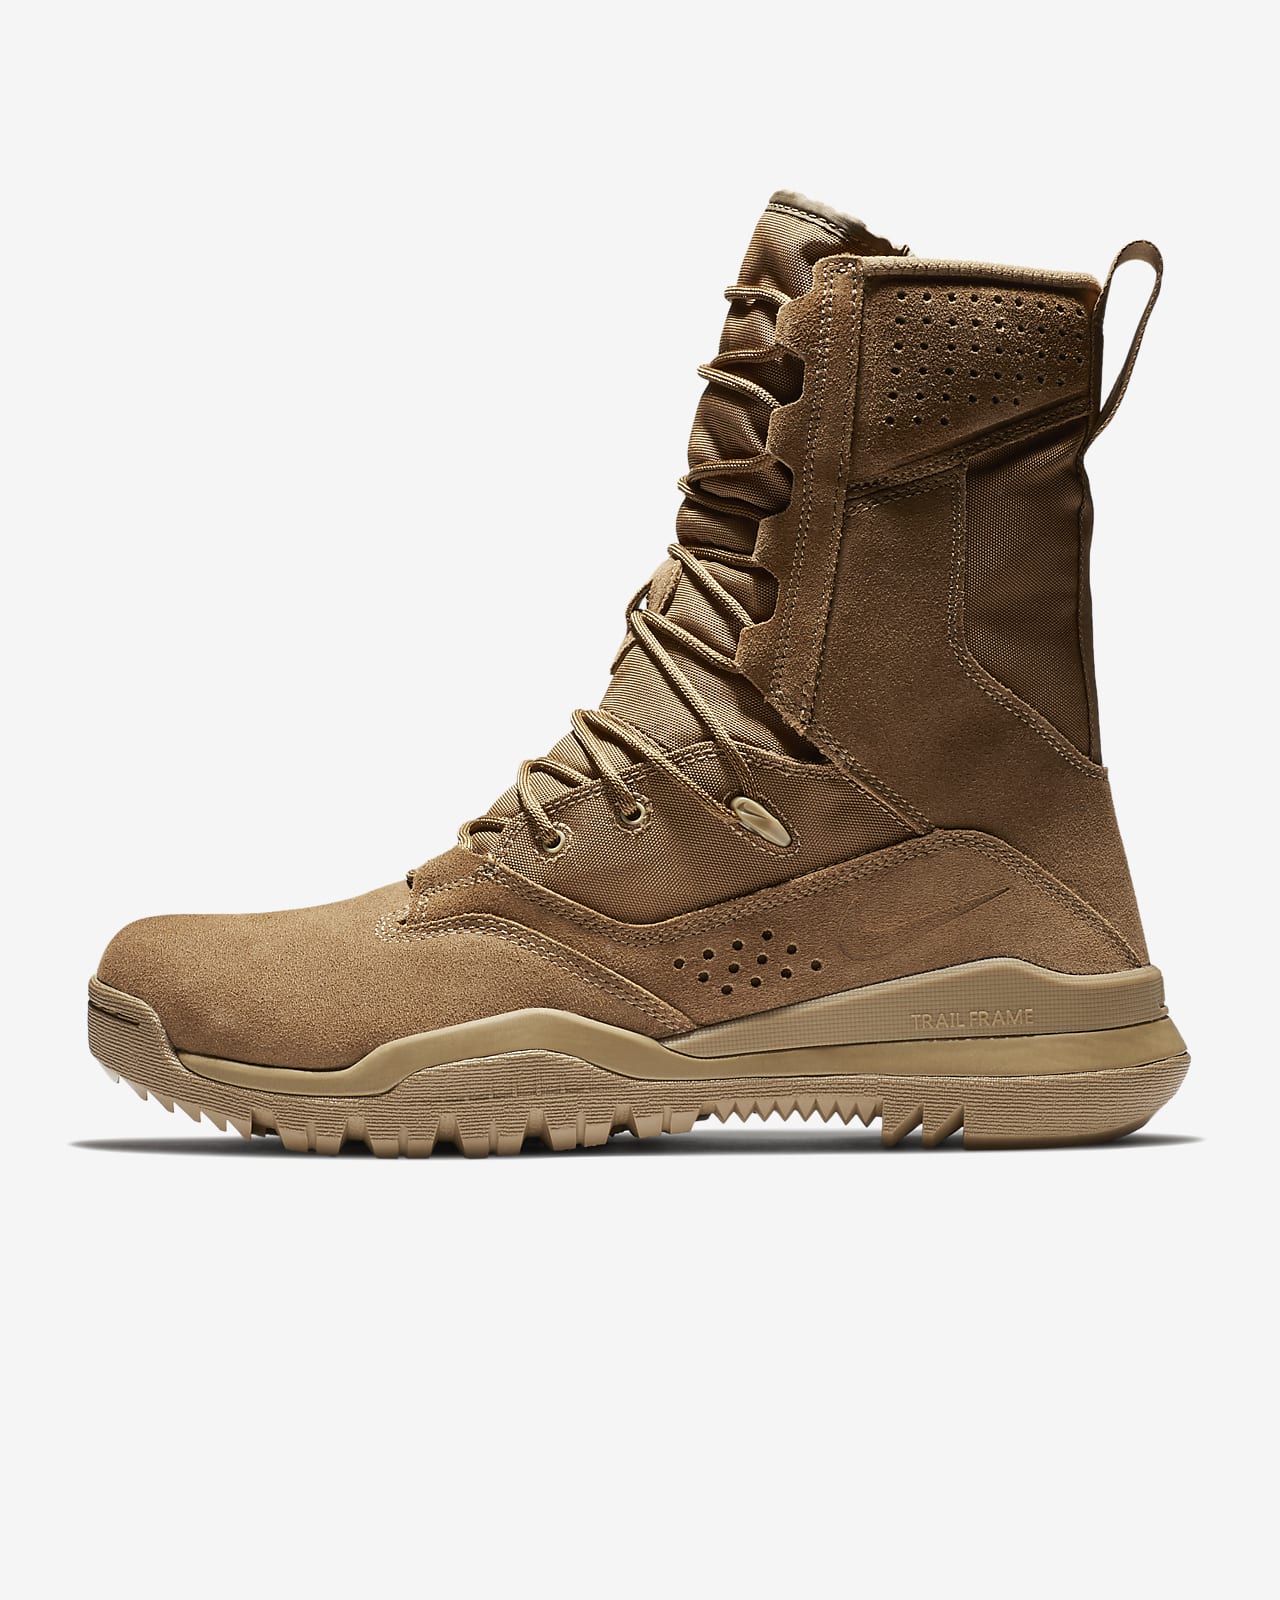 Nike SFB Field 2 8" Leather Tactical Boots